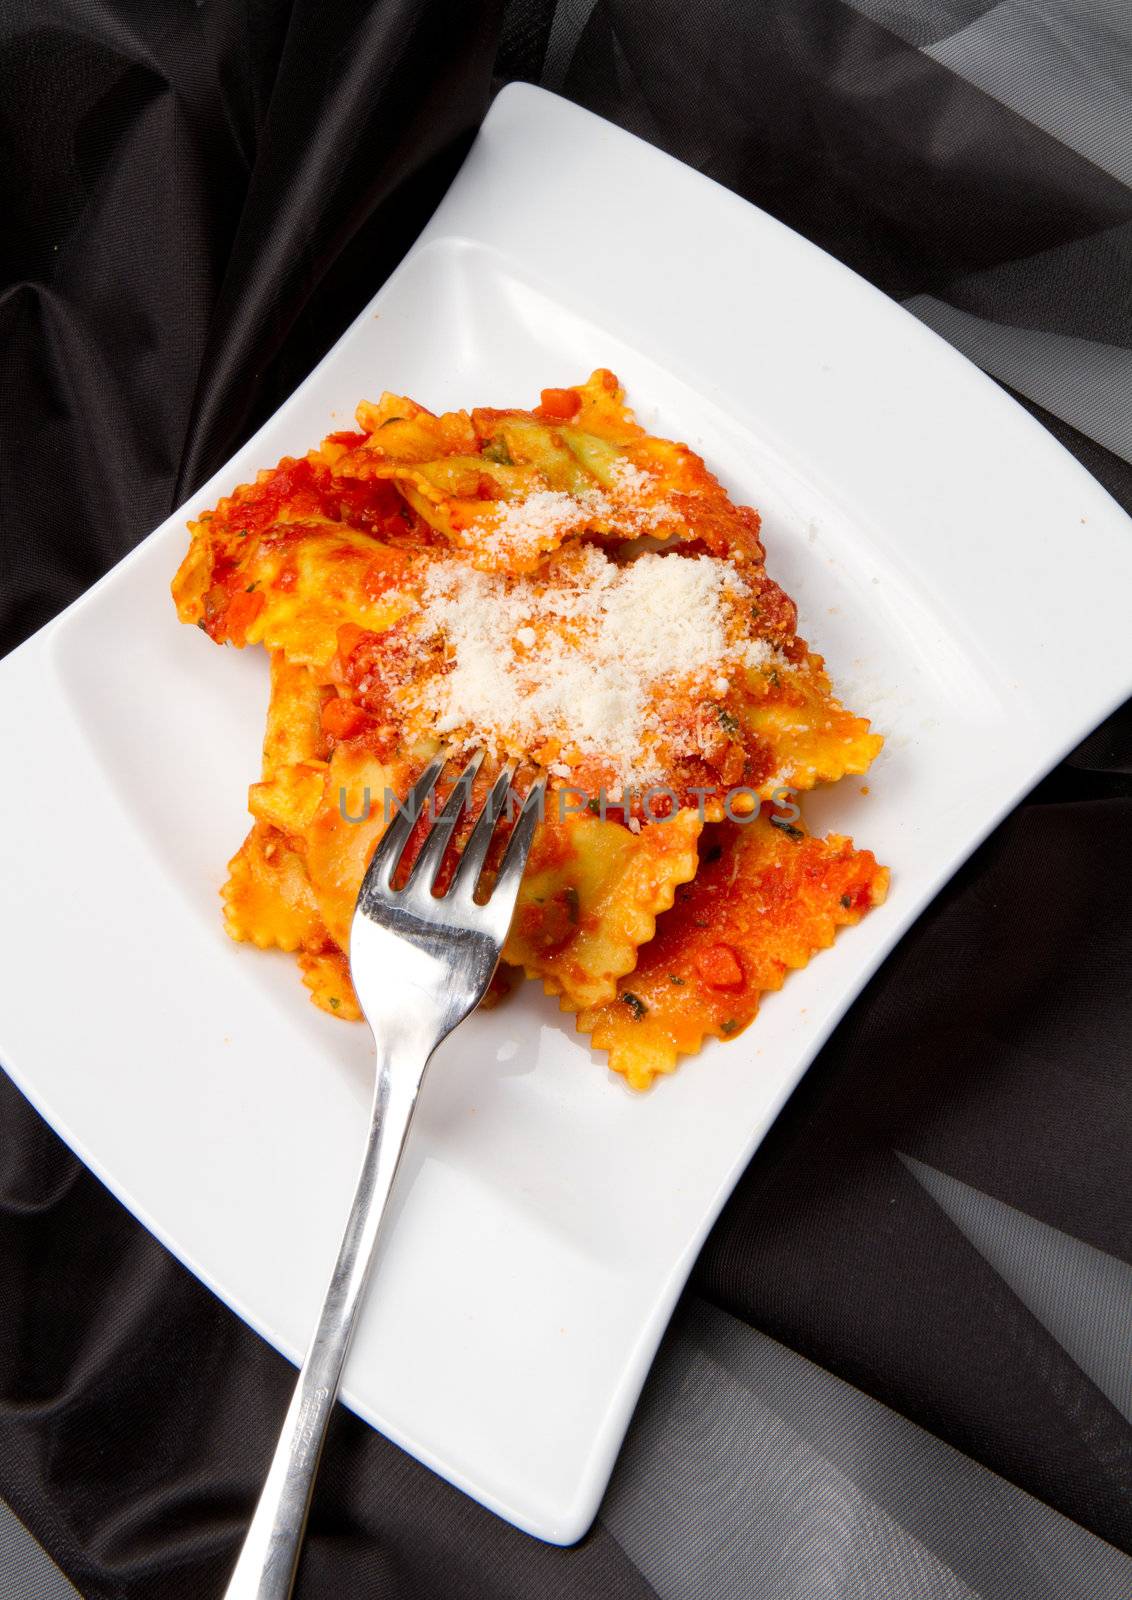 ravioli with tomatoes sauce by lsantilli